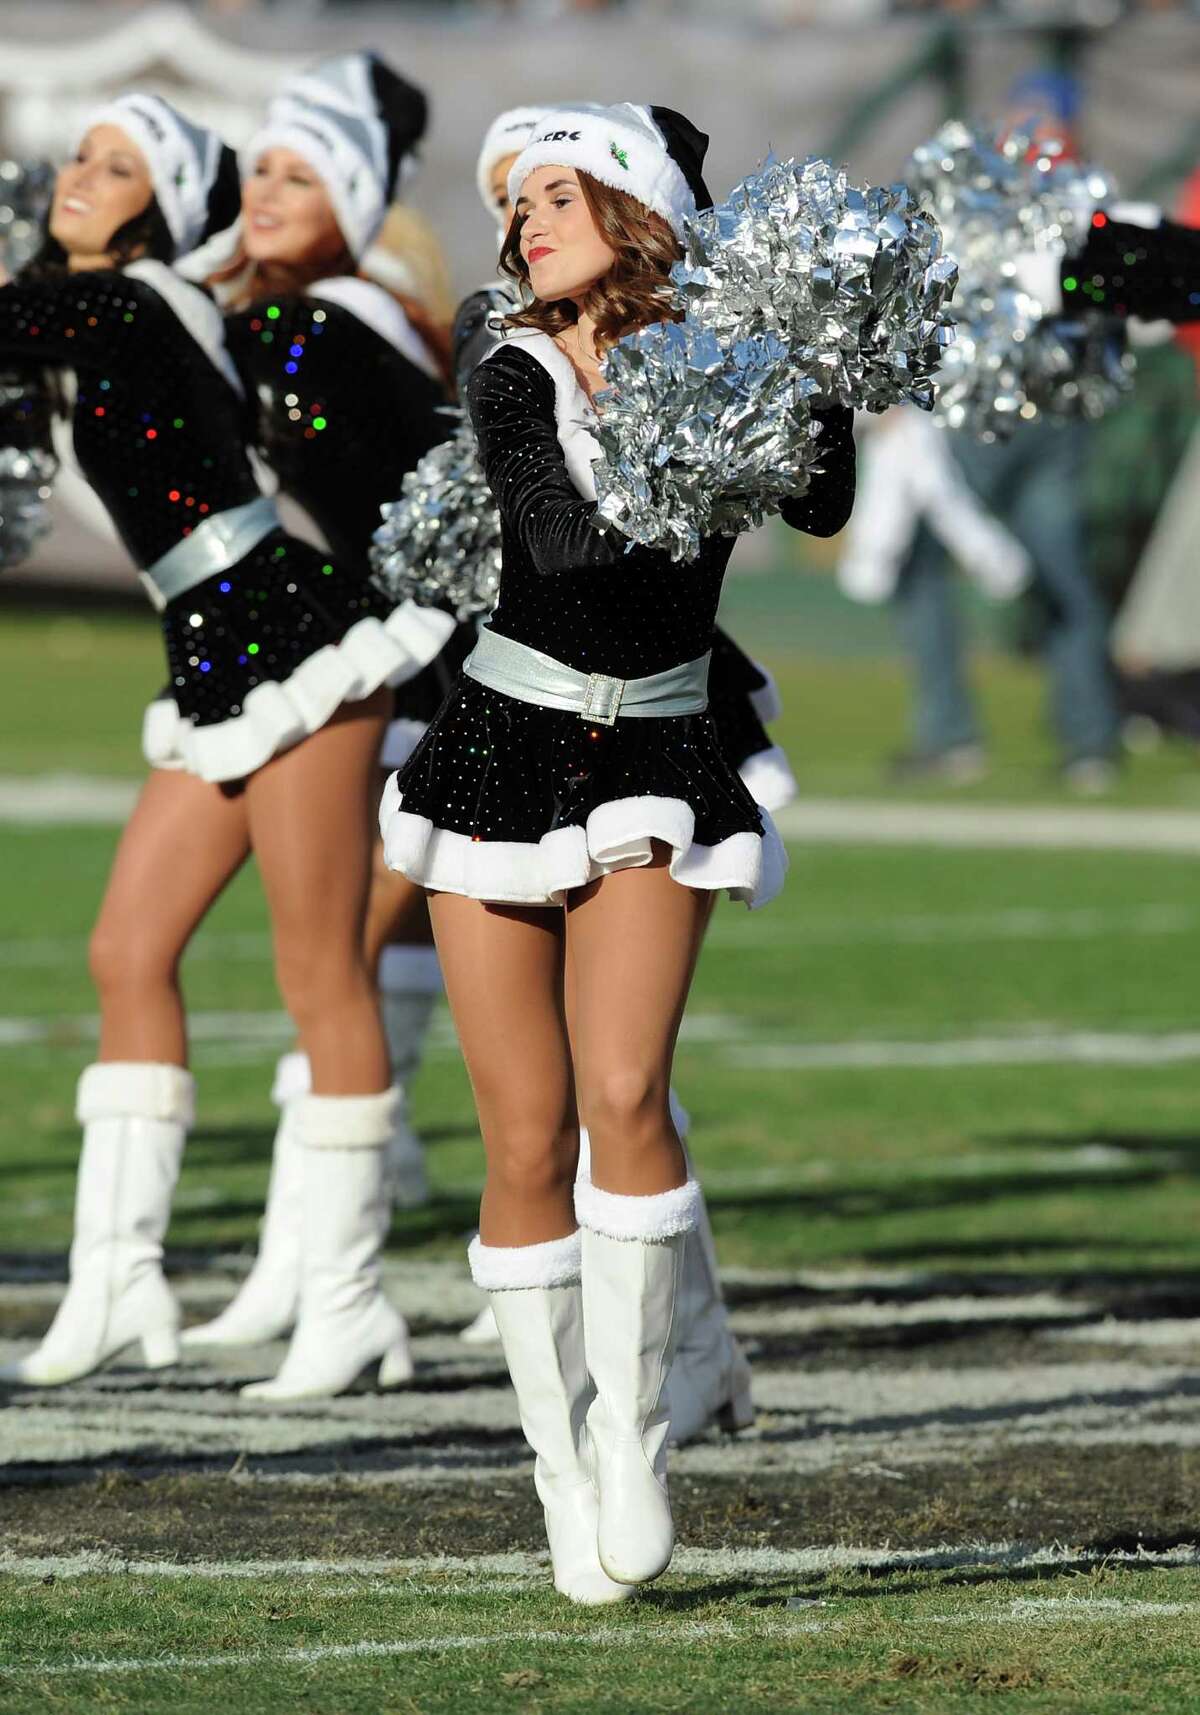 Oakland Raiders cheerleader Lacy T., seen in 2013, was a plaintiff in a lawsuit accusing the team of violating wage laws.